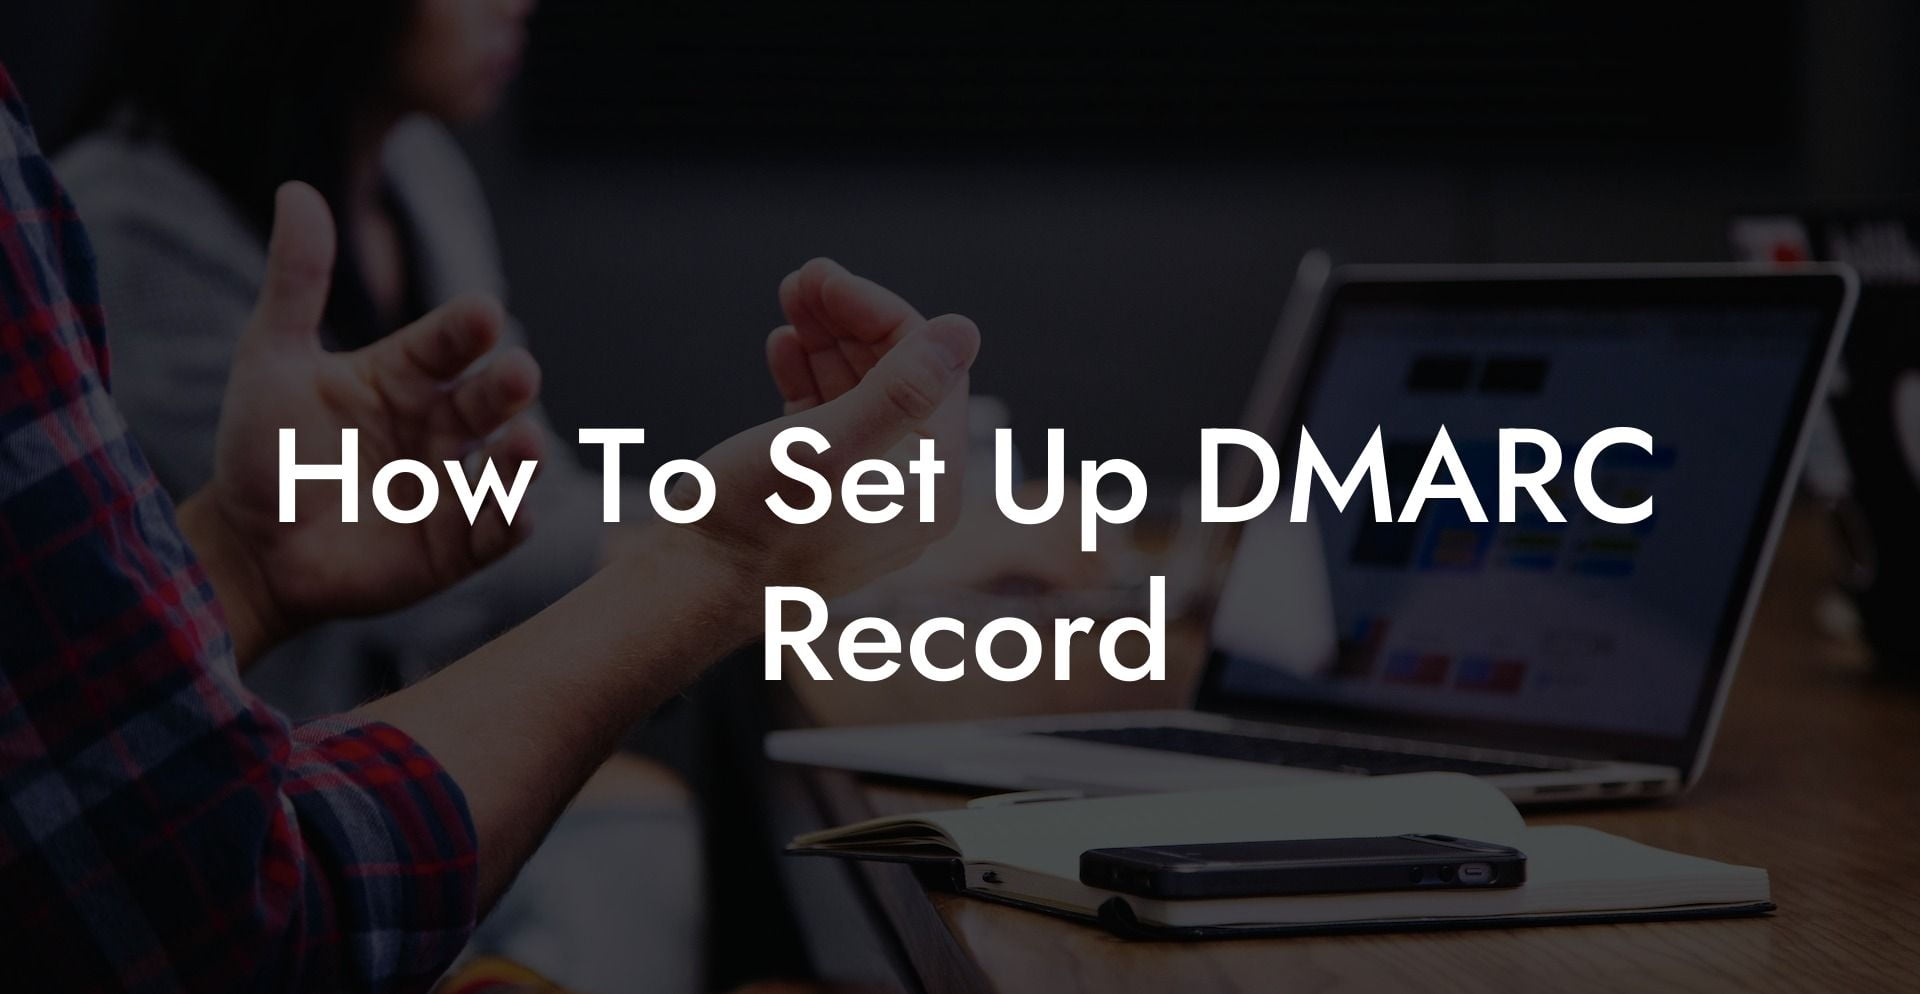 How To Set Up DMARC Record